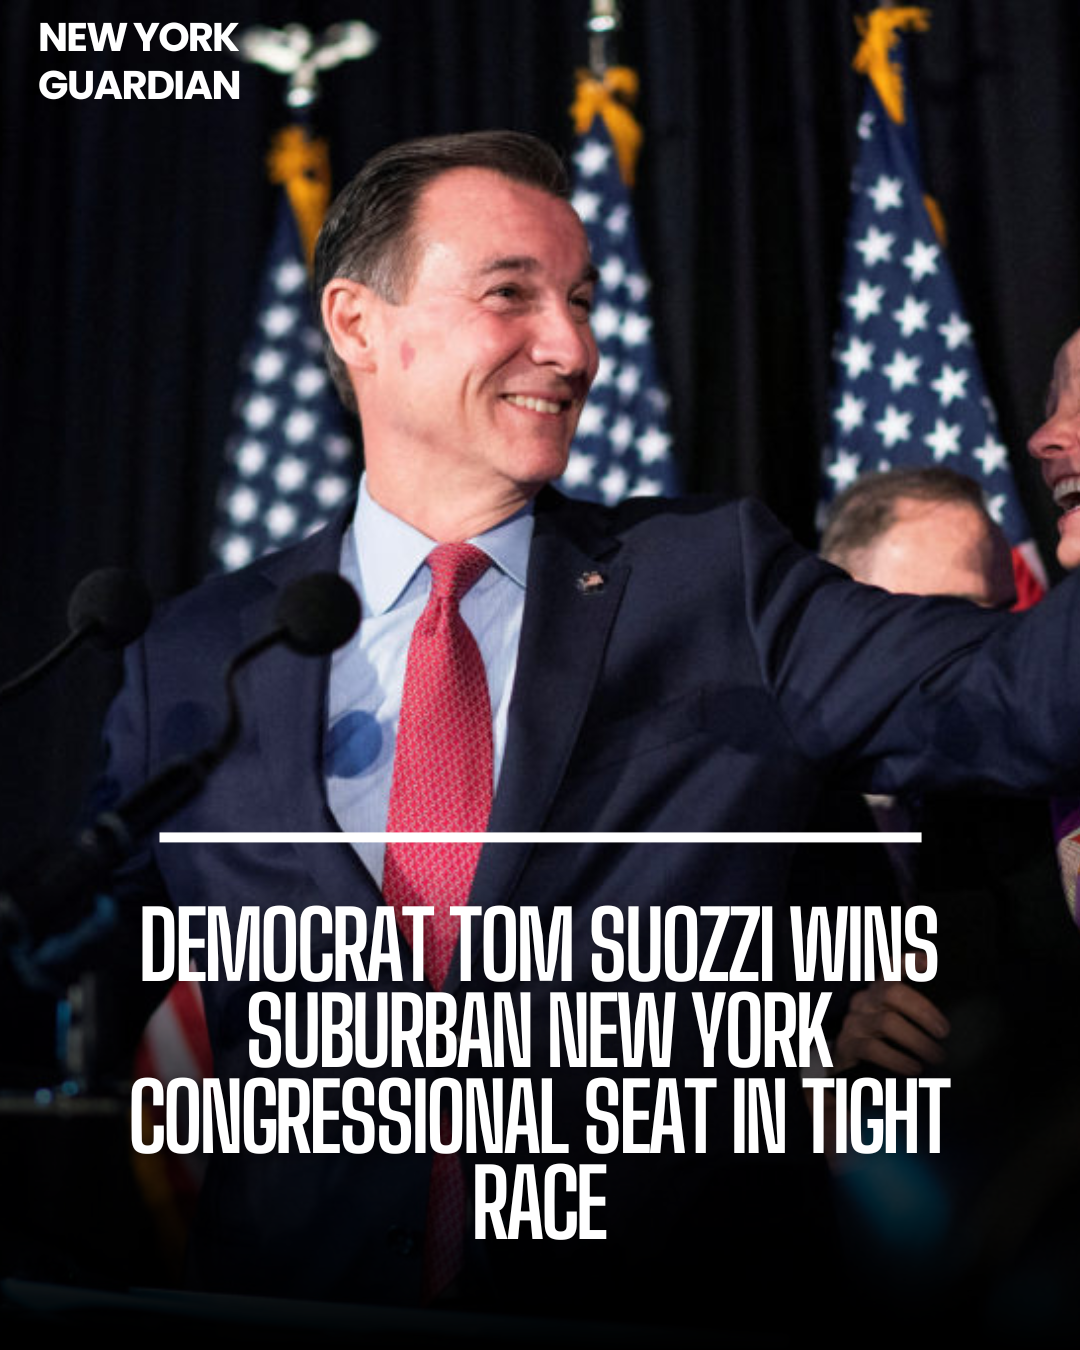 Voters in suburban New York chose Democrat Tom Suozzi to replace ousted Republican Congressman George Santos.